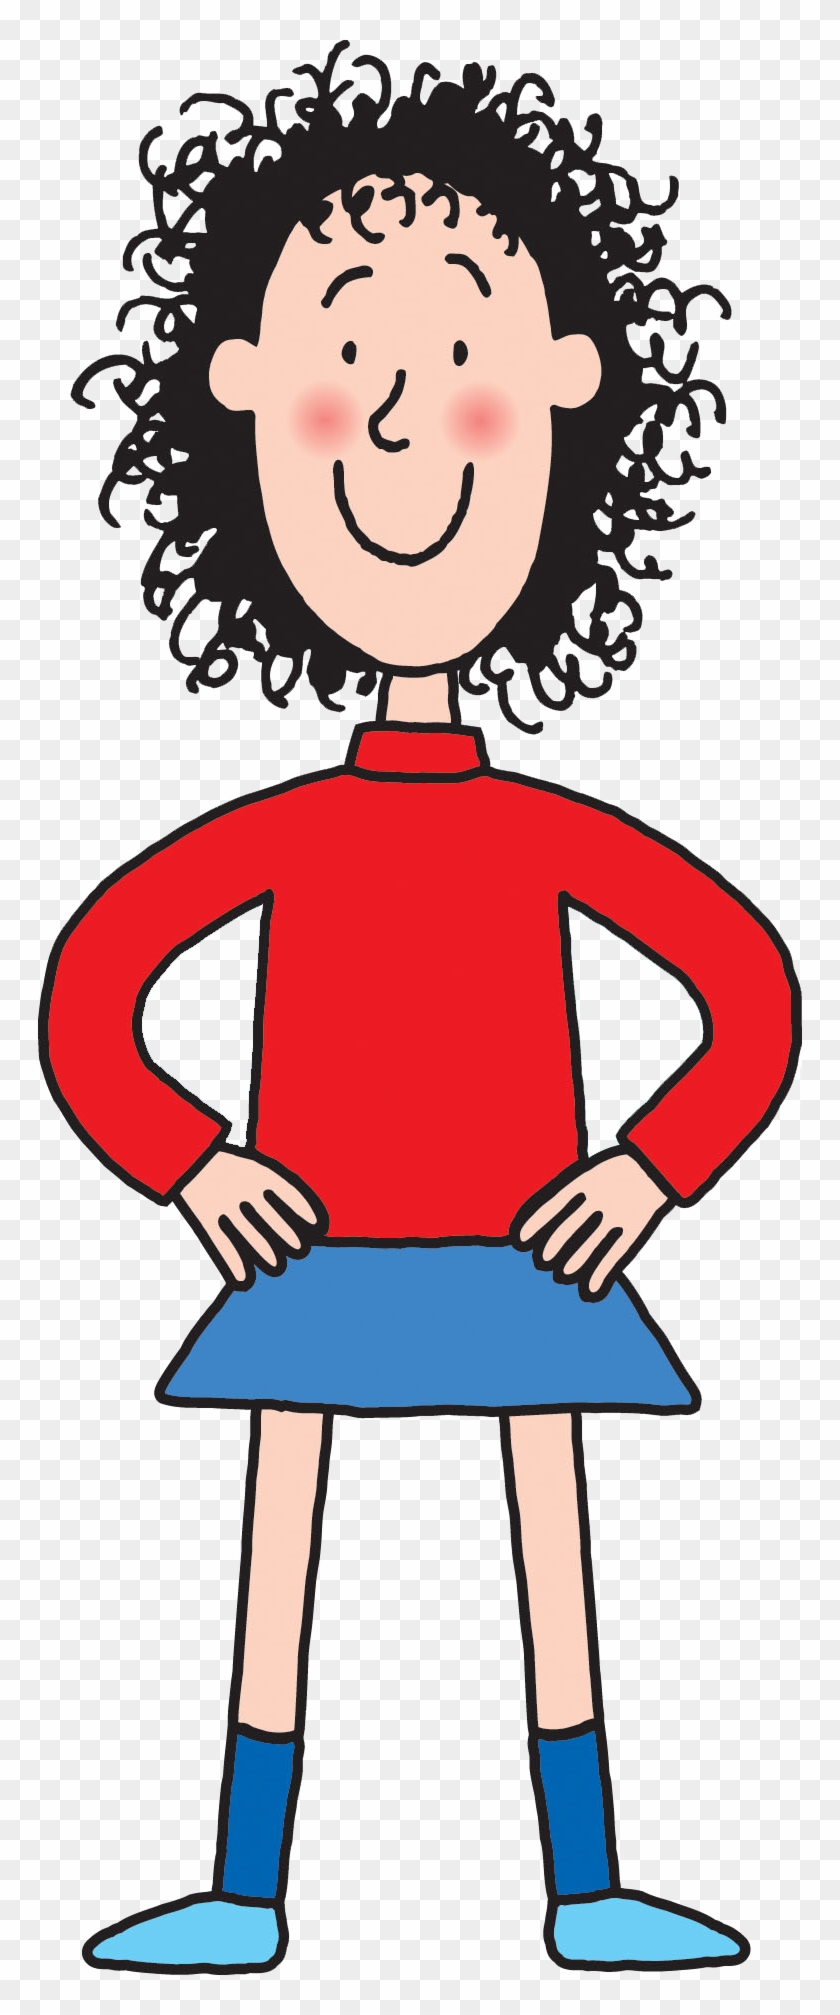 Children S Books Characters Jacqueline Wilson Tracy Beaker Free Transparent Png Clipart Images Download